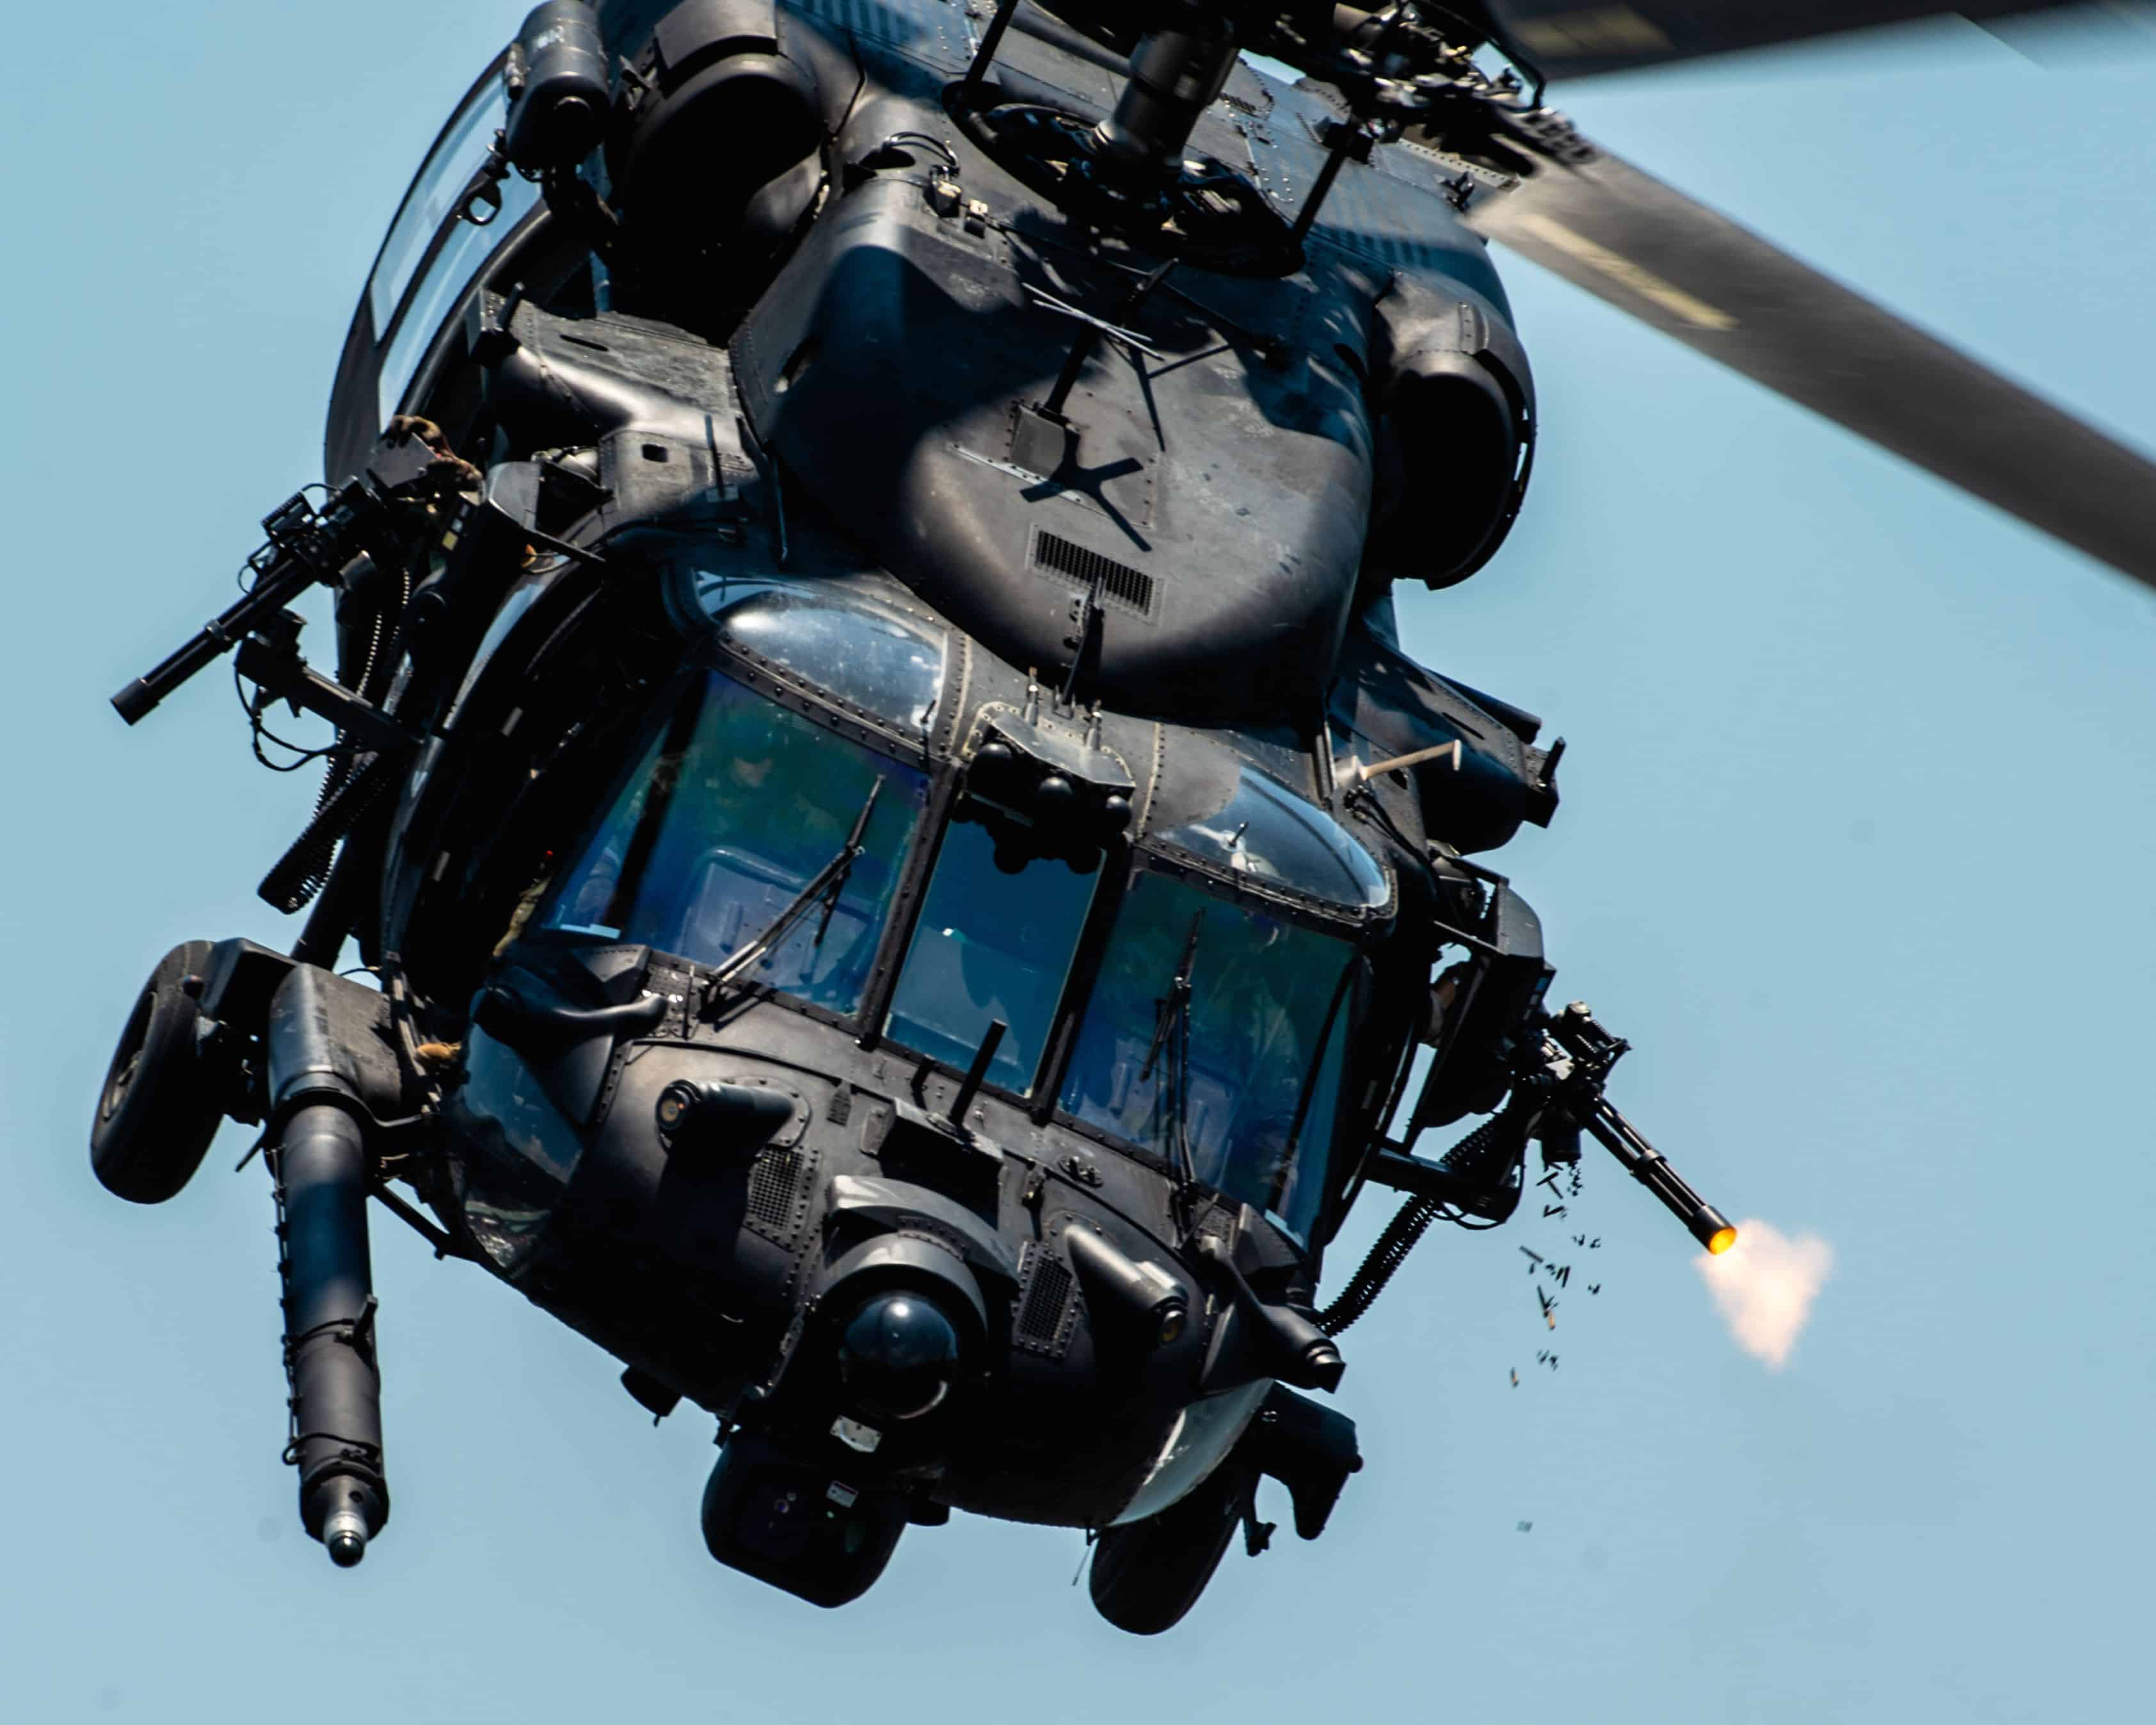 U.S. Special Operations Forces members fly over Tampa Bay, Florida in a U.S. Army MH-60 helicopter during a SOF capabilities demonstration May 18, 2022. SOF Week is the premier gathering for theSOF community and industry, bringing together more than 11,000 attendees, including representatives from more than 100 countries to collaborate on new initiatives and capabilities needed for SOF professionals to compete and win in the future. (U.S. Air Force photo by Staff Sgt. Alexander Cook)